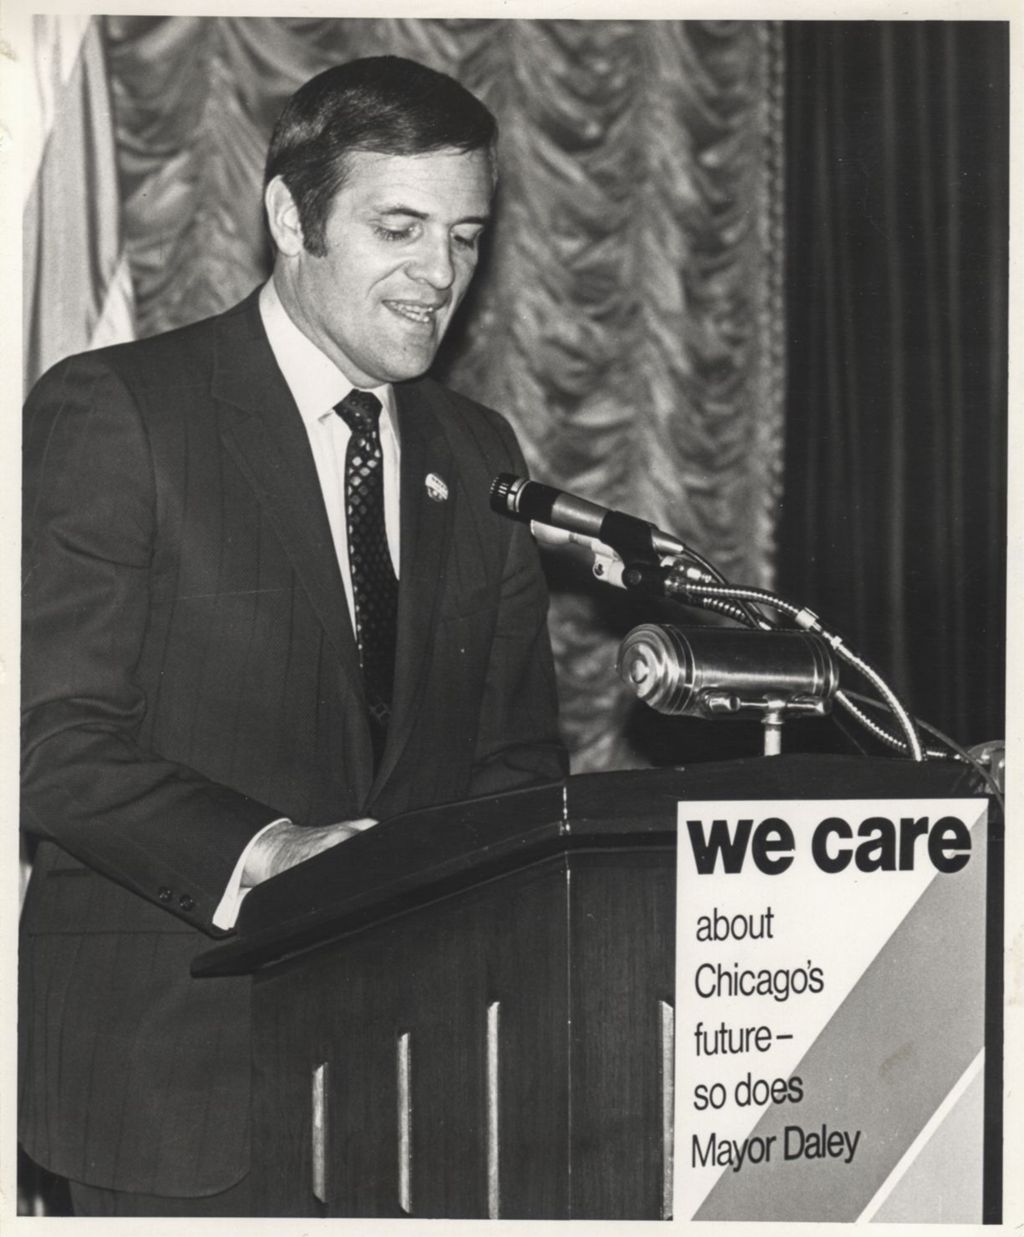 Man speaking at a "We Care" event